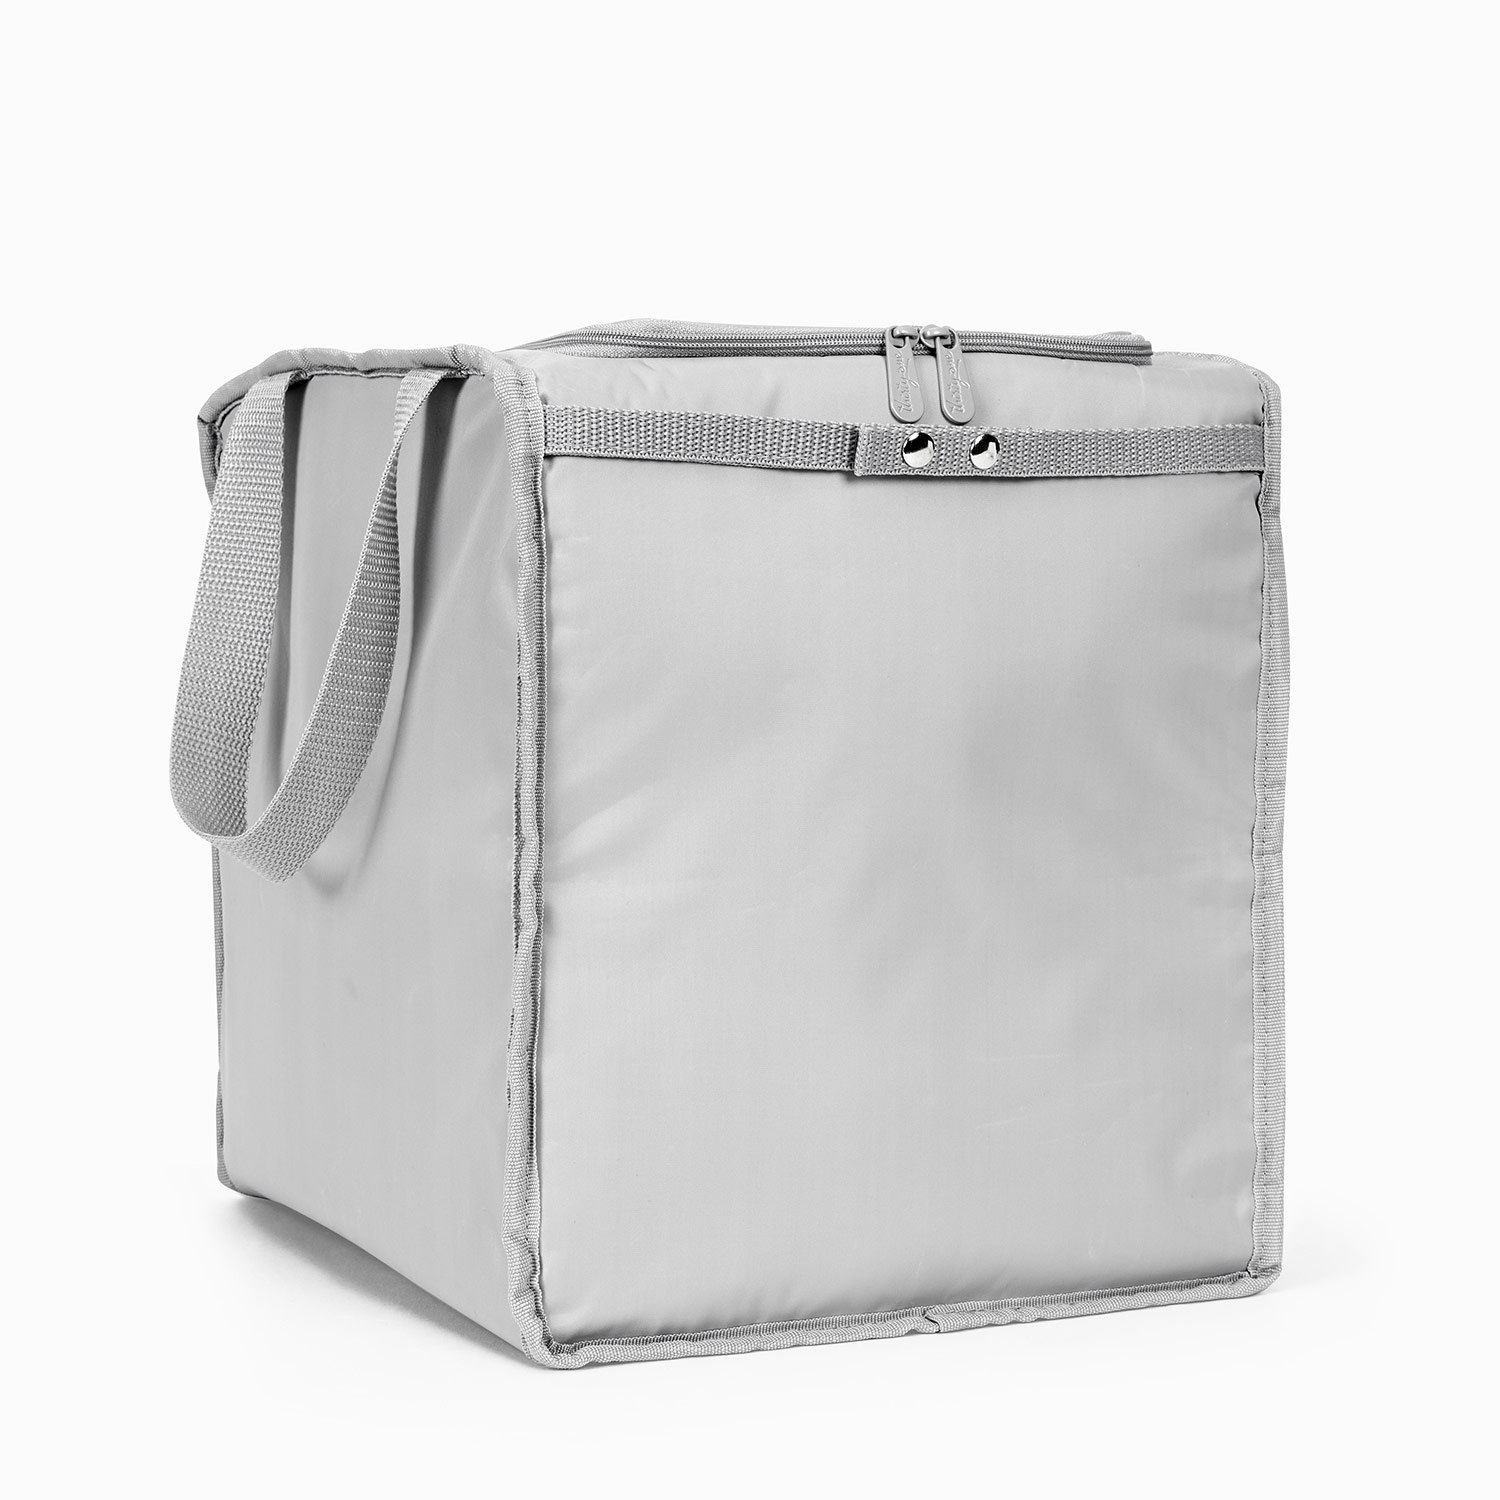 The new soft cooler Inserts fits perfectly in the 31 Large utility